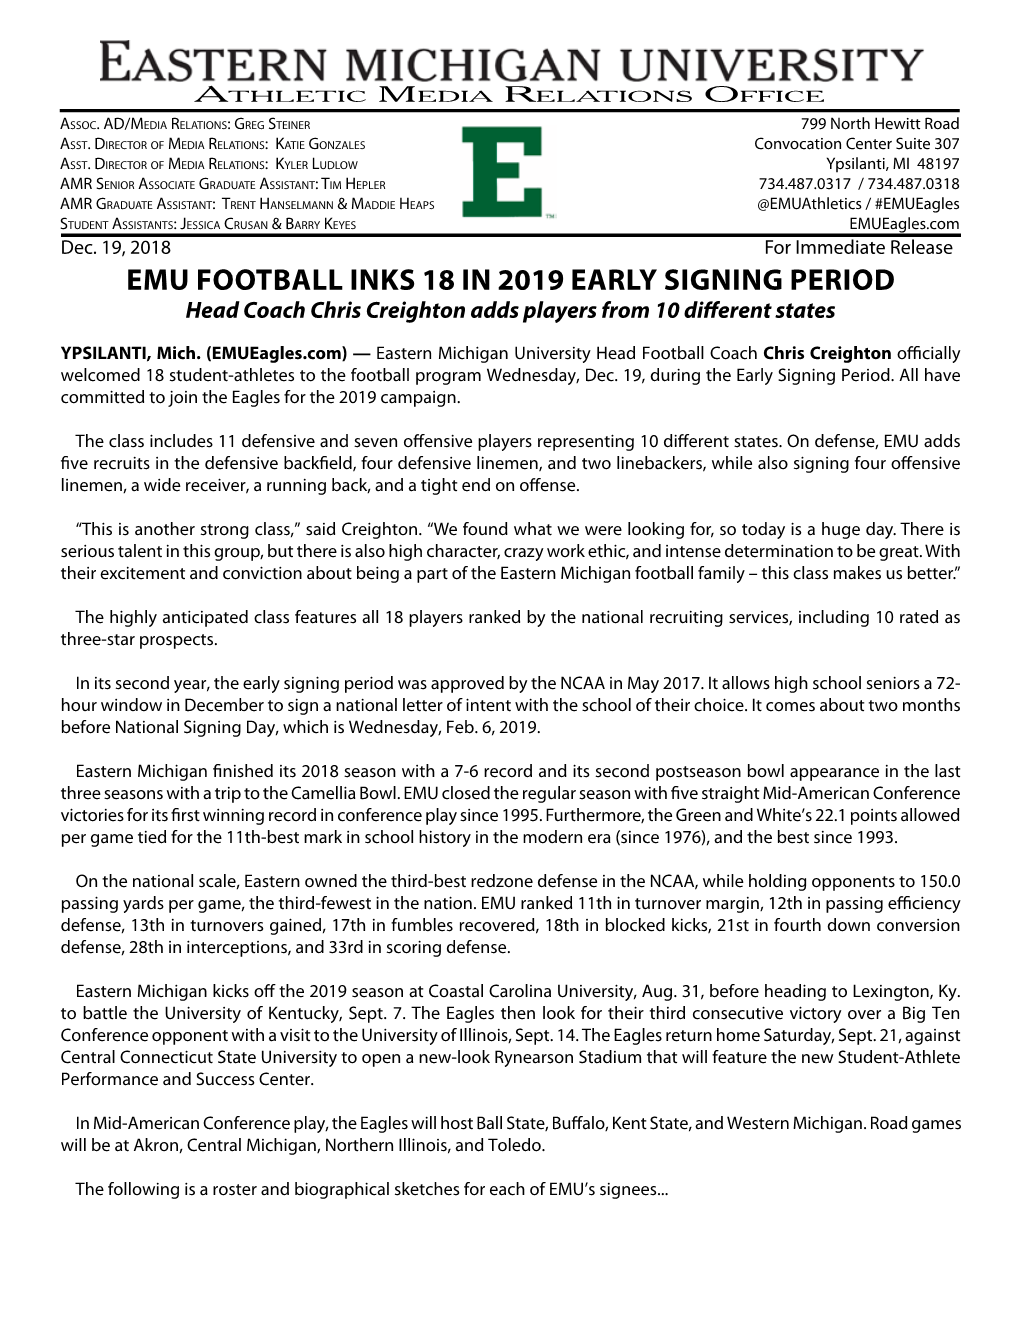 EMU FOOTBALL INKS 18 in 2019 EARLY SIGNING PERIOD Head Coach Chris Creighton Adds Players from 10 Different States